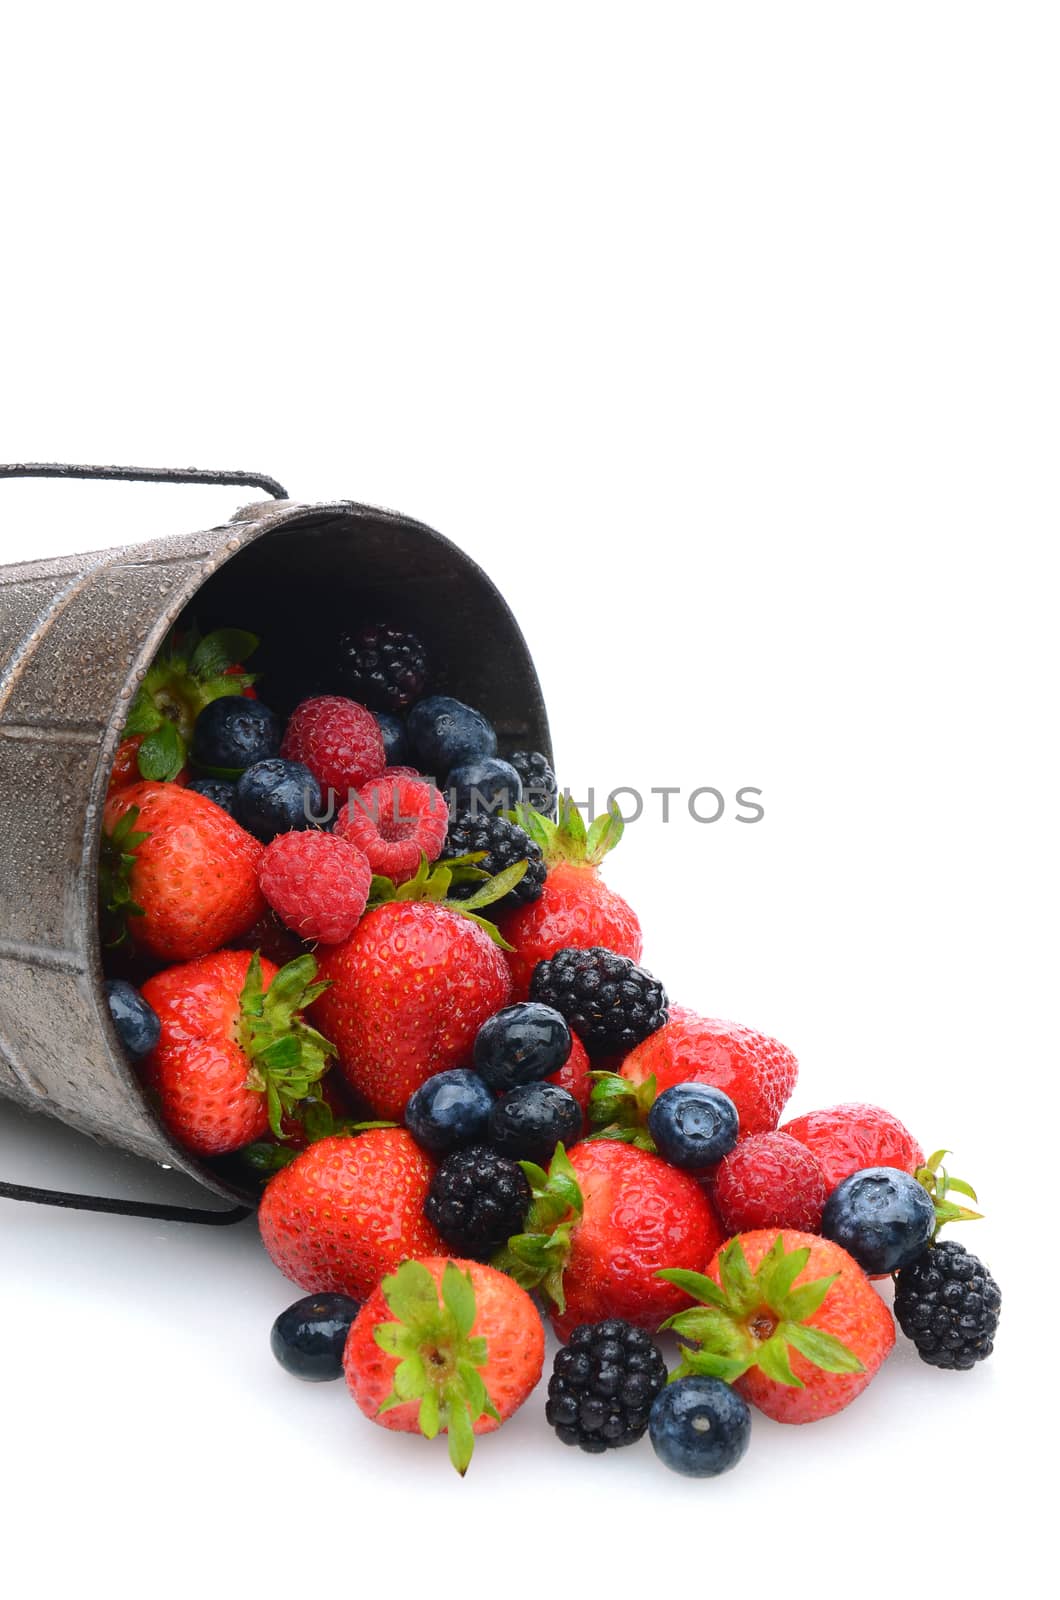 Pail with Berries Spilling Out by sCukrov